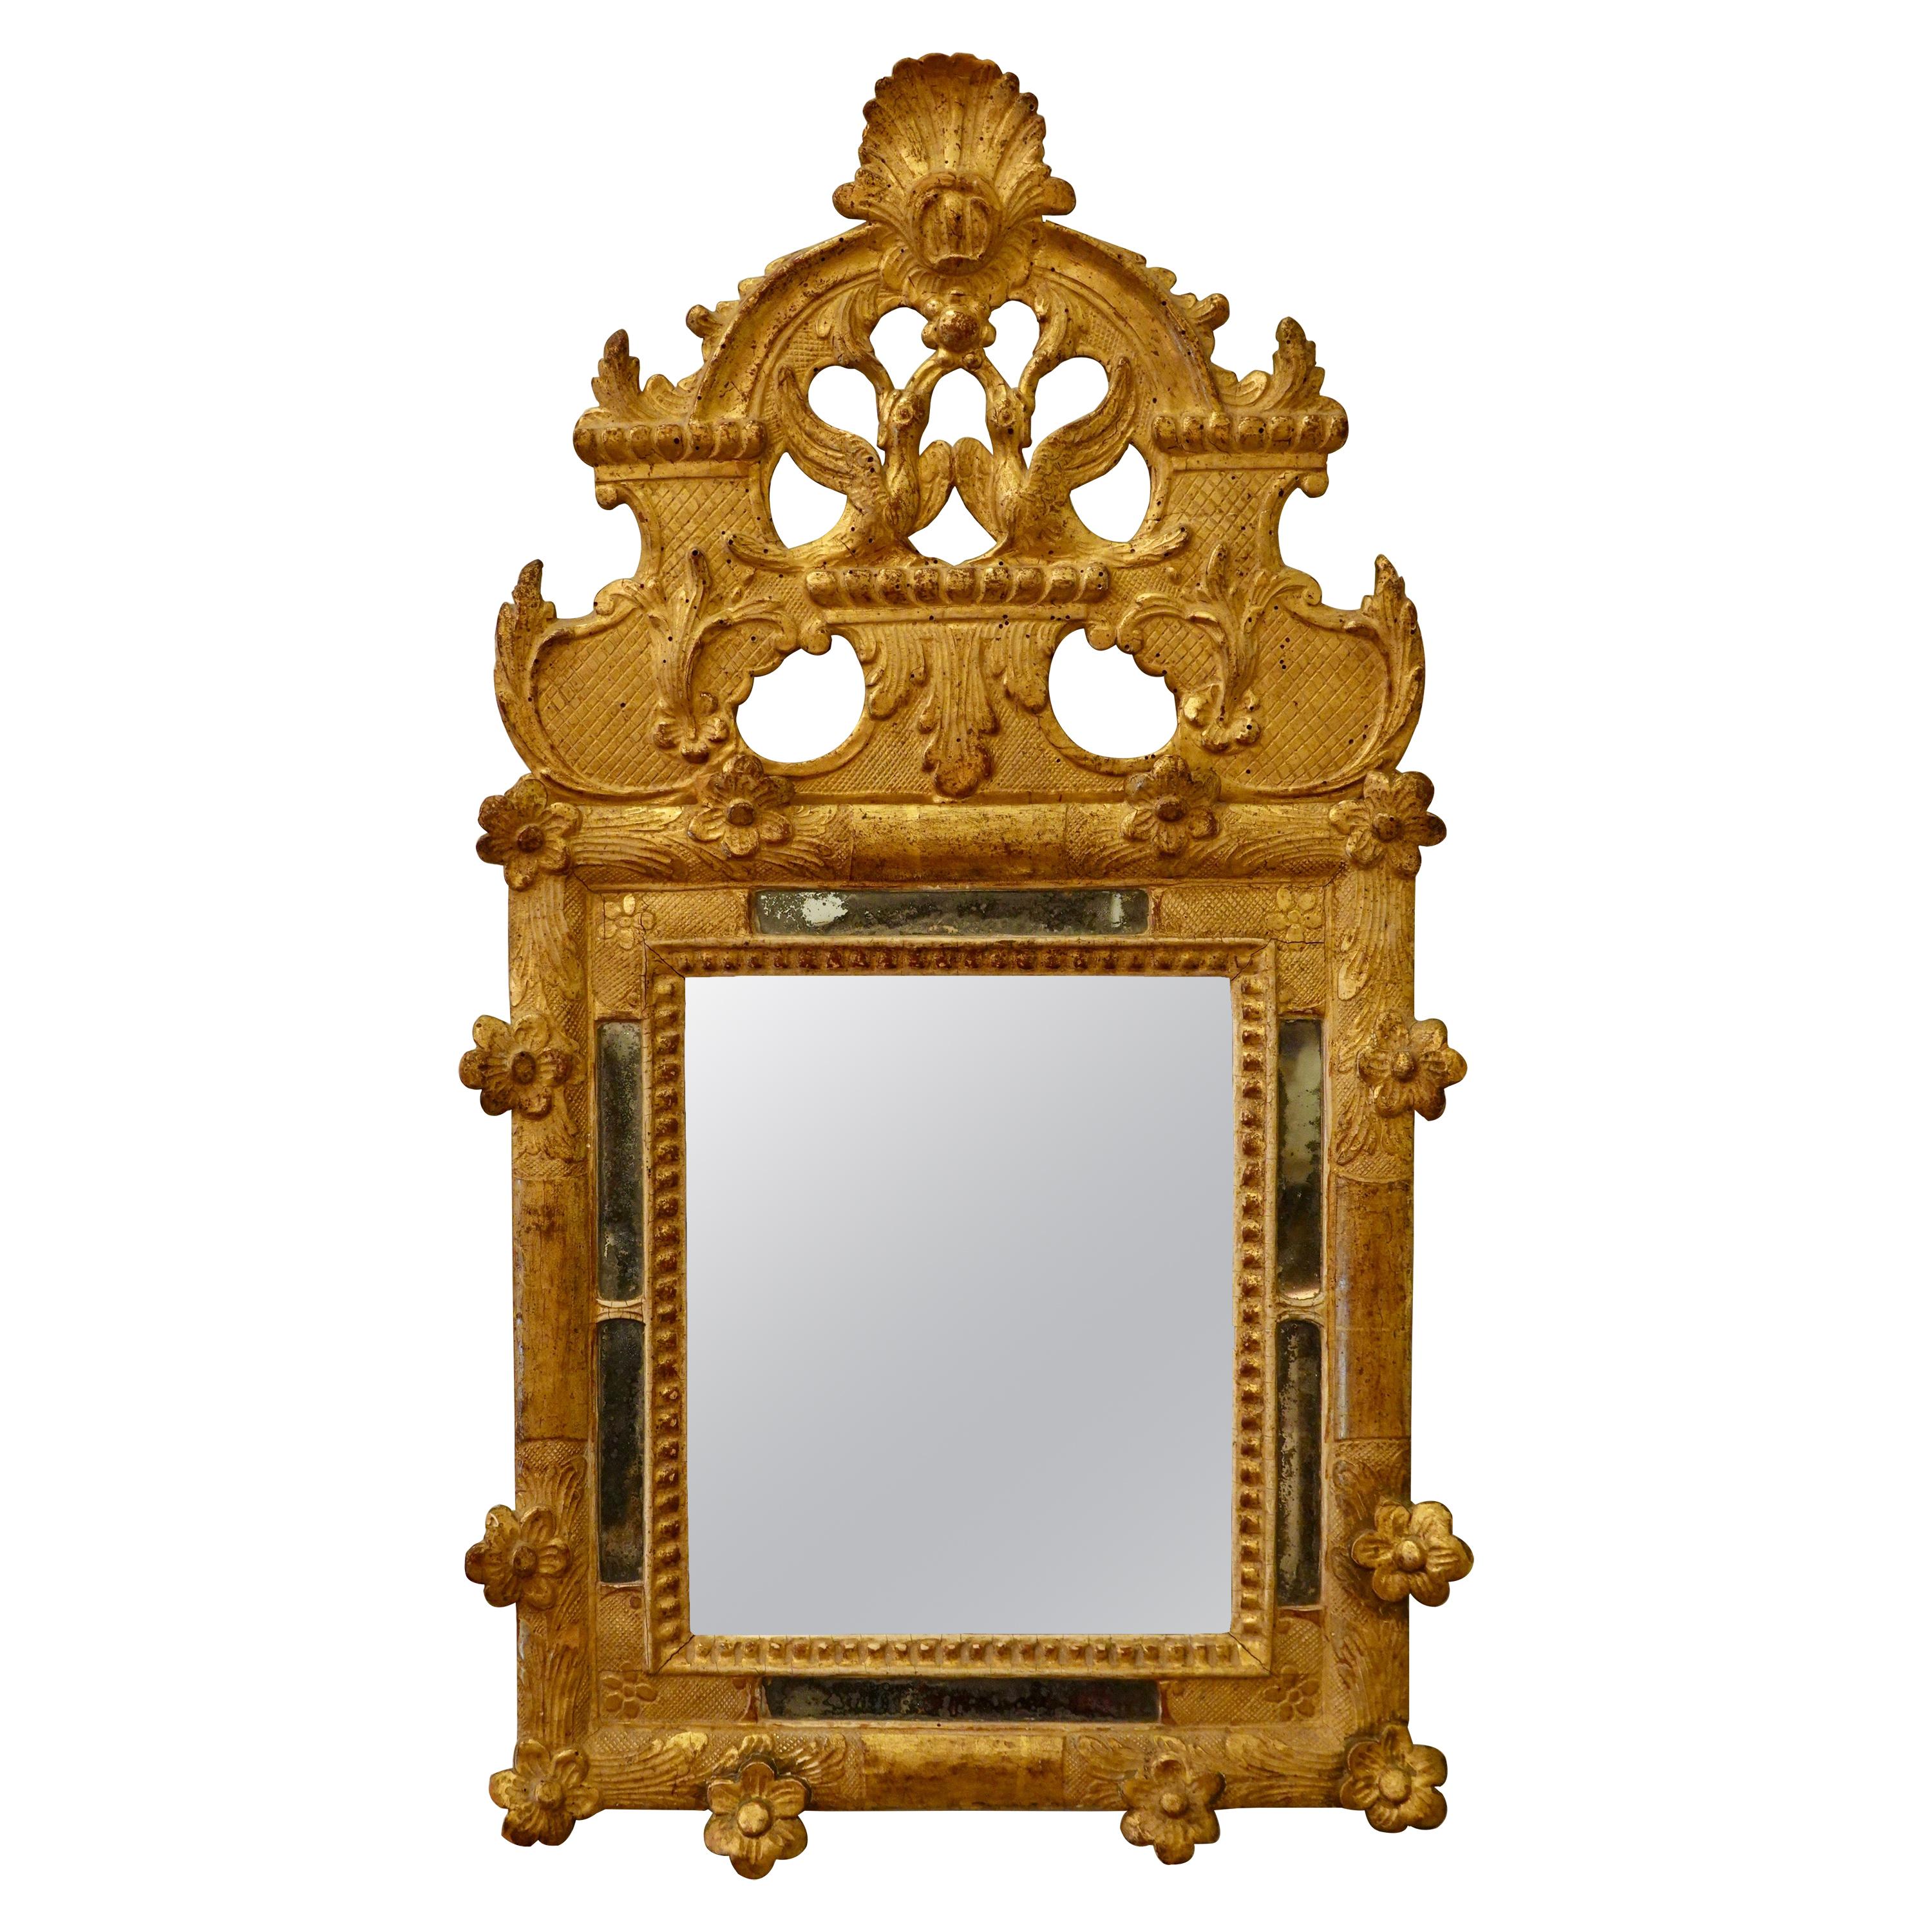 French Regence Period Giltwood Mirror with Birds, Scallop Shell and Flowers